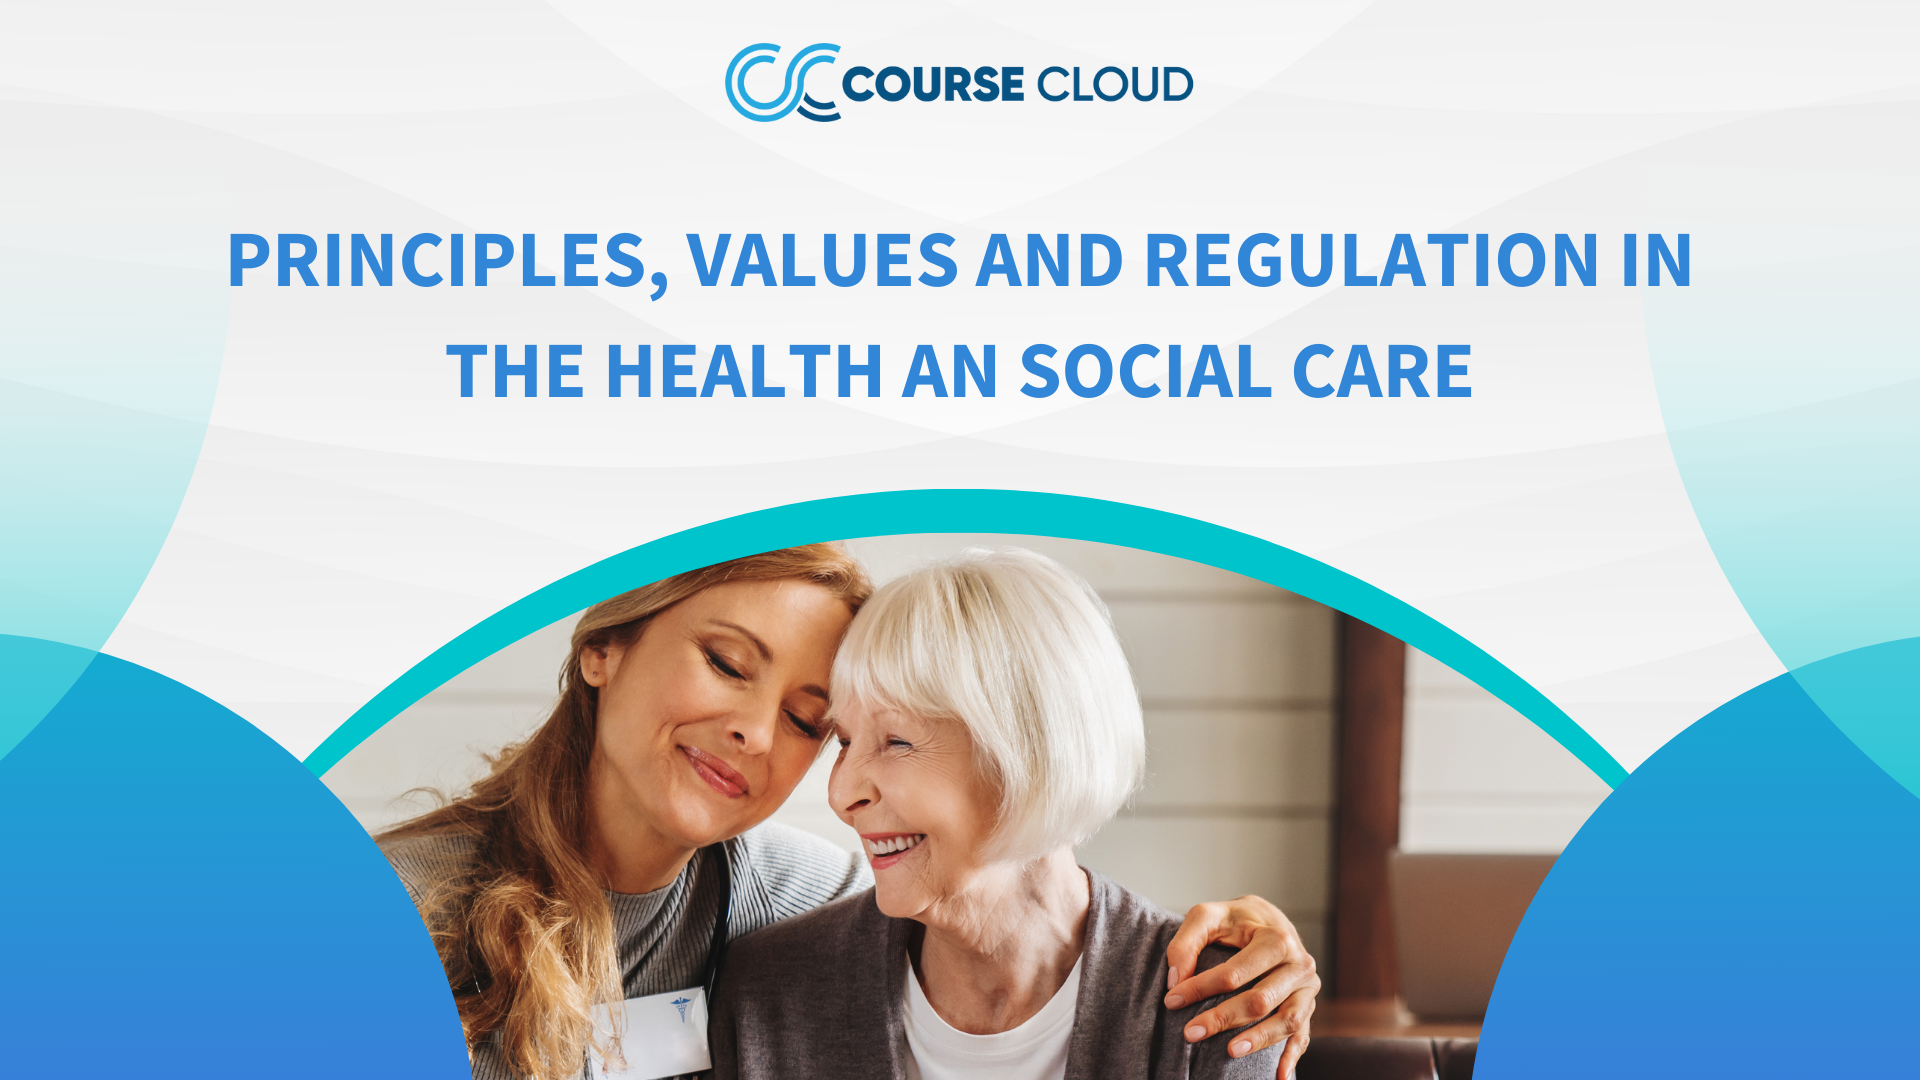 Principles, Values and Regulation in the Health an Social Care